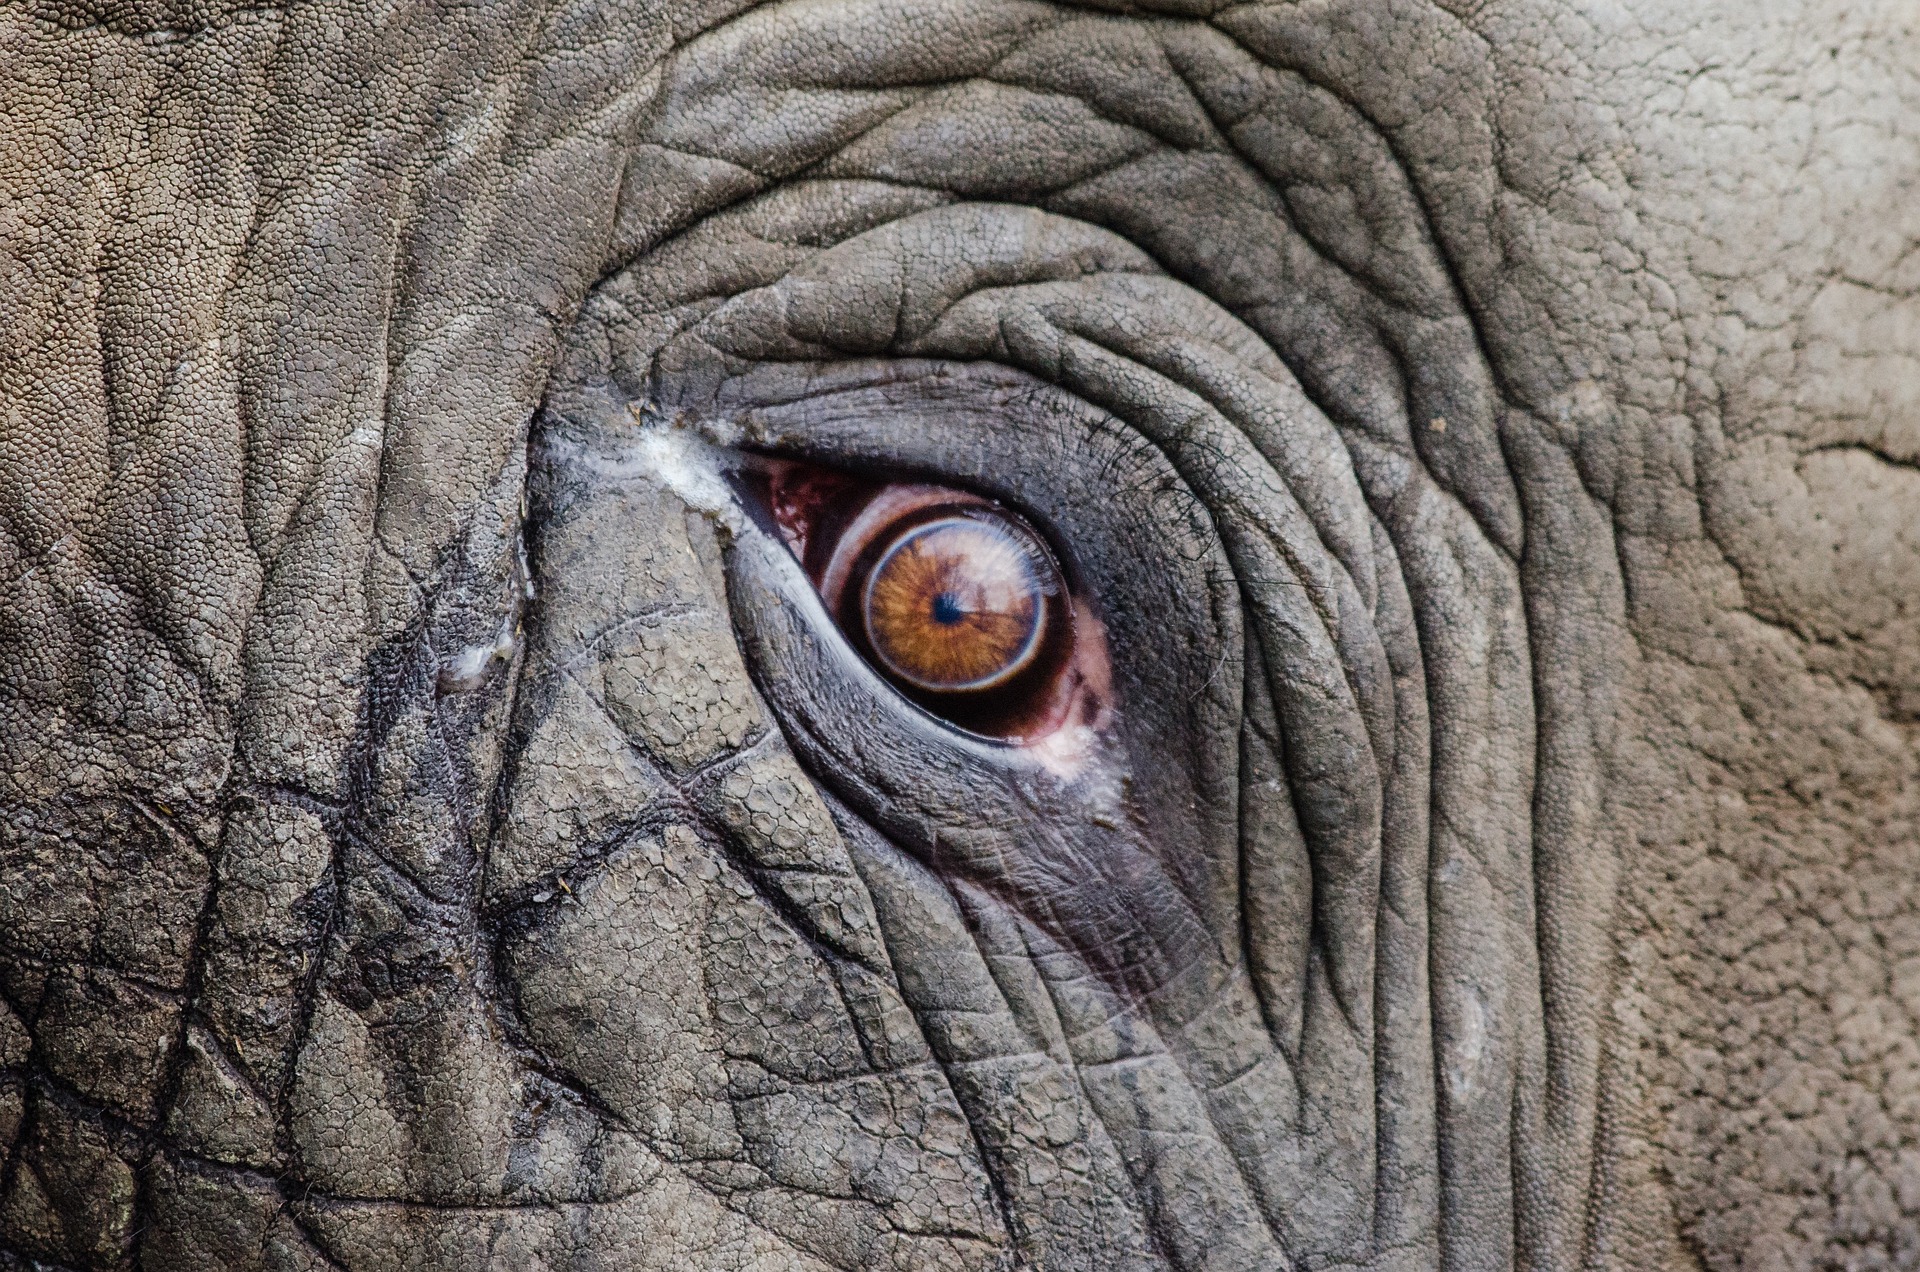 Elephants: A Closer Look at Their Intelligence